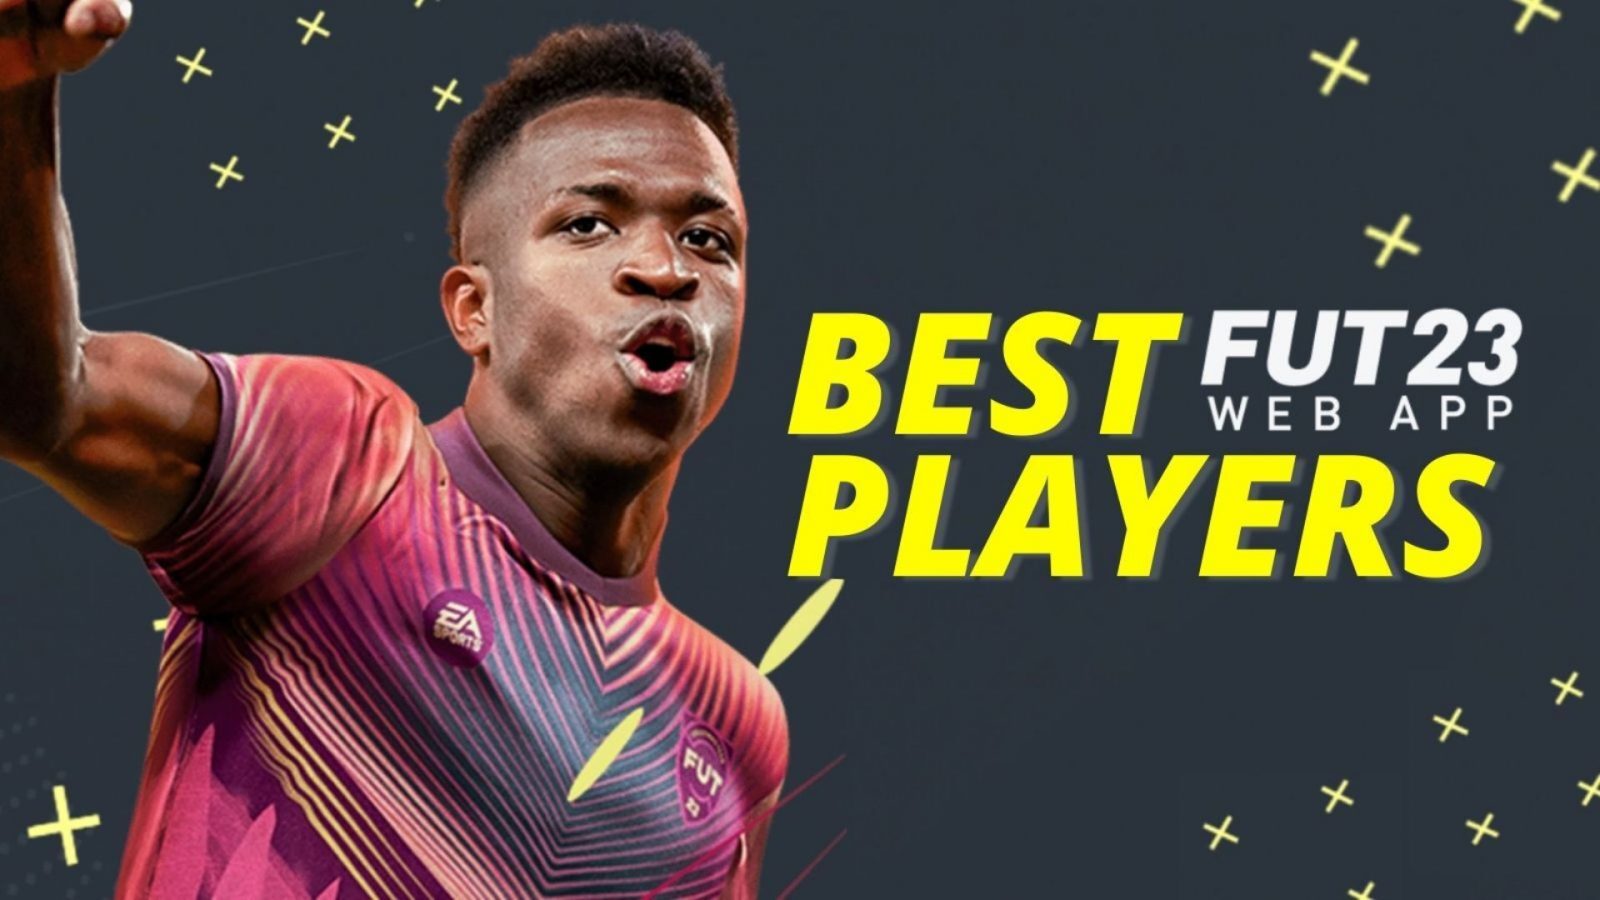 Best FIFA 23 players to sign in Web App: 9 cards to buy before full game release